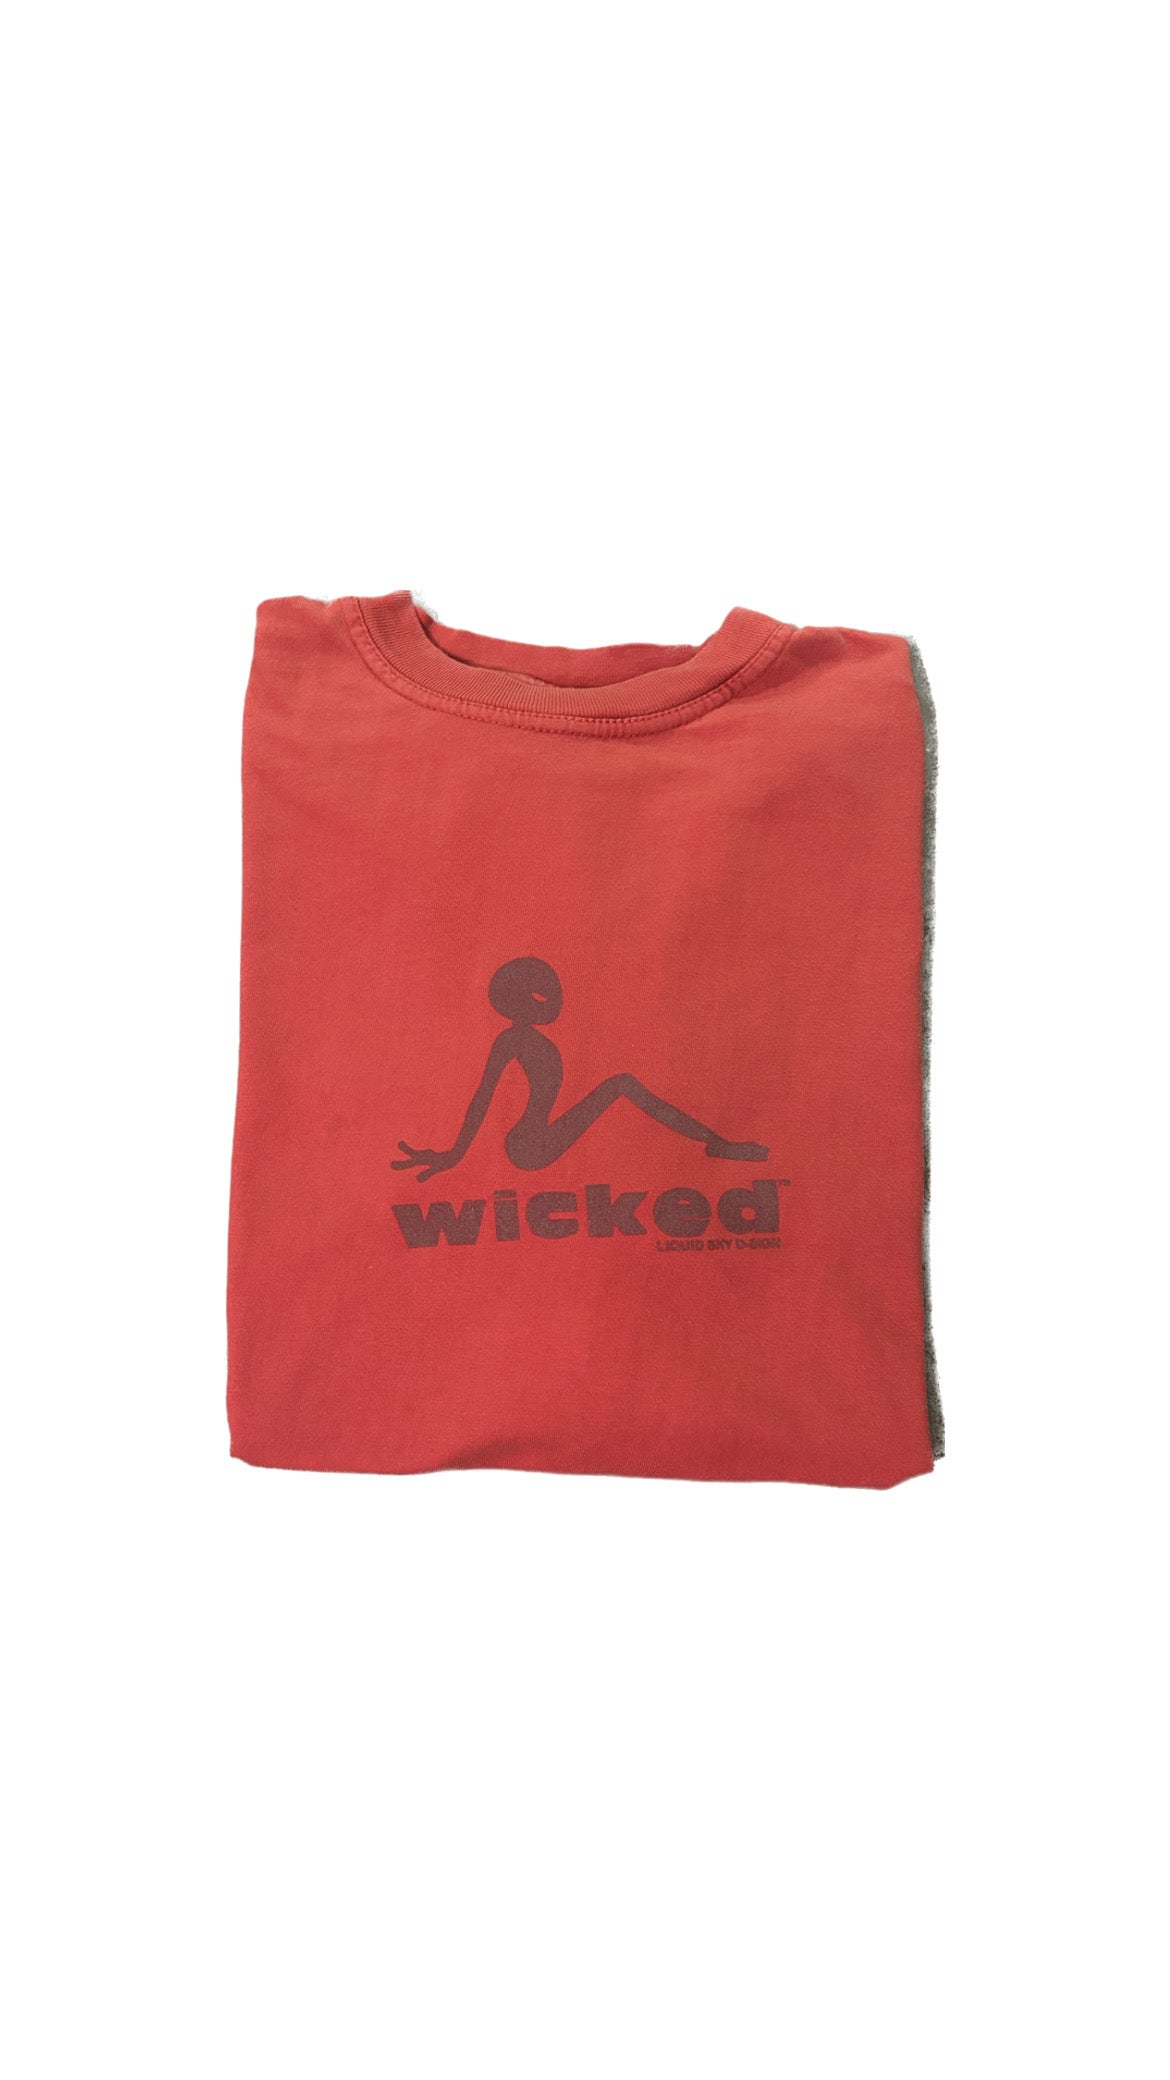 WICKED upcycled -size M